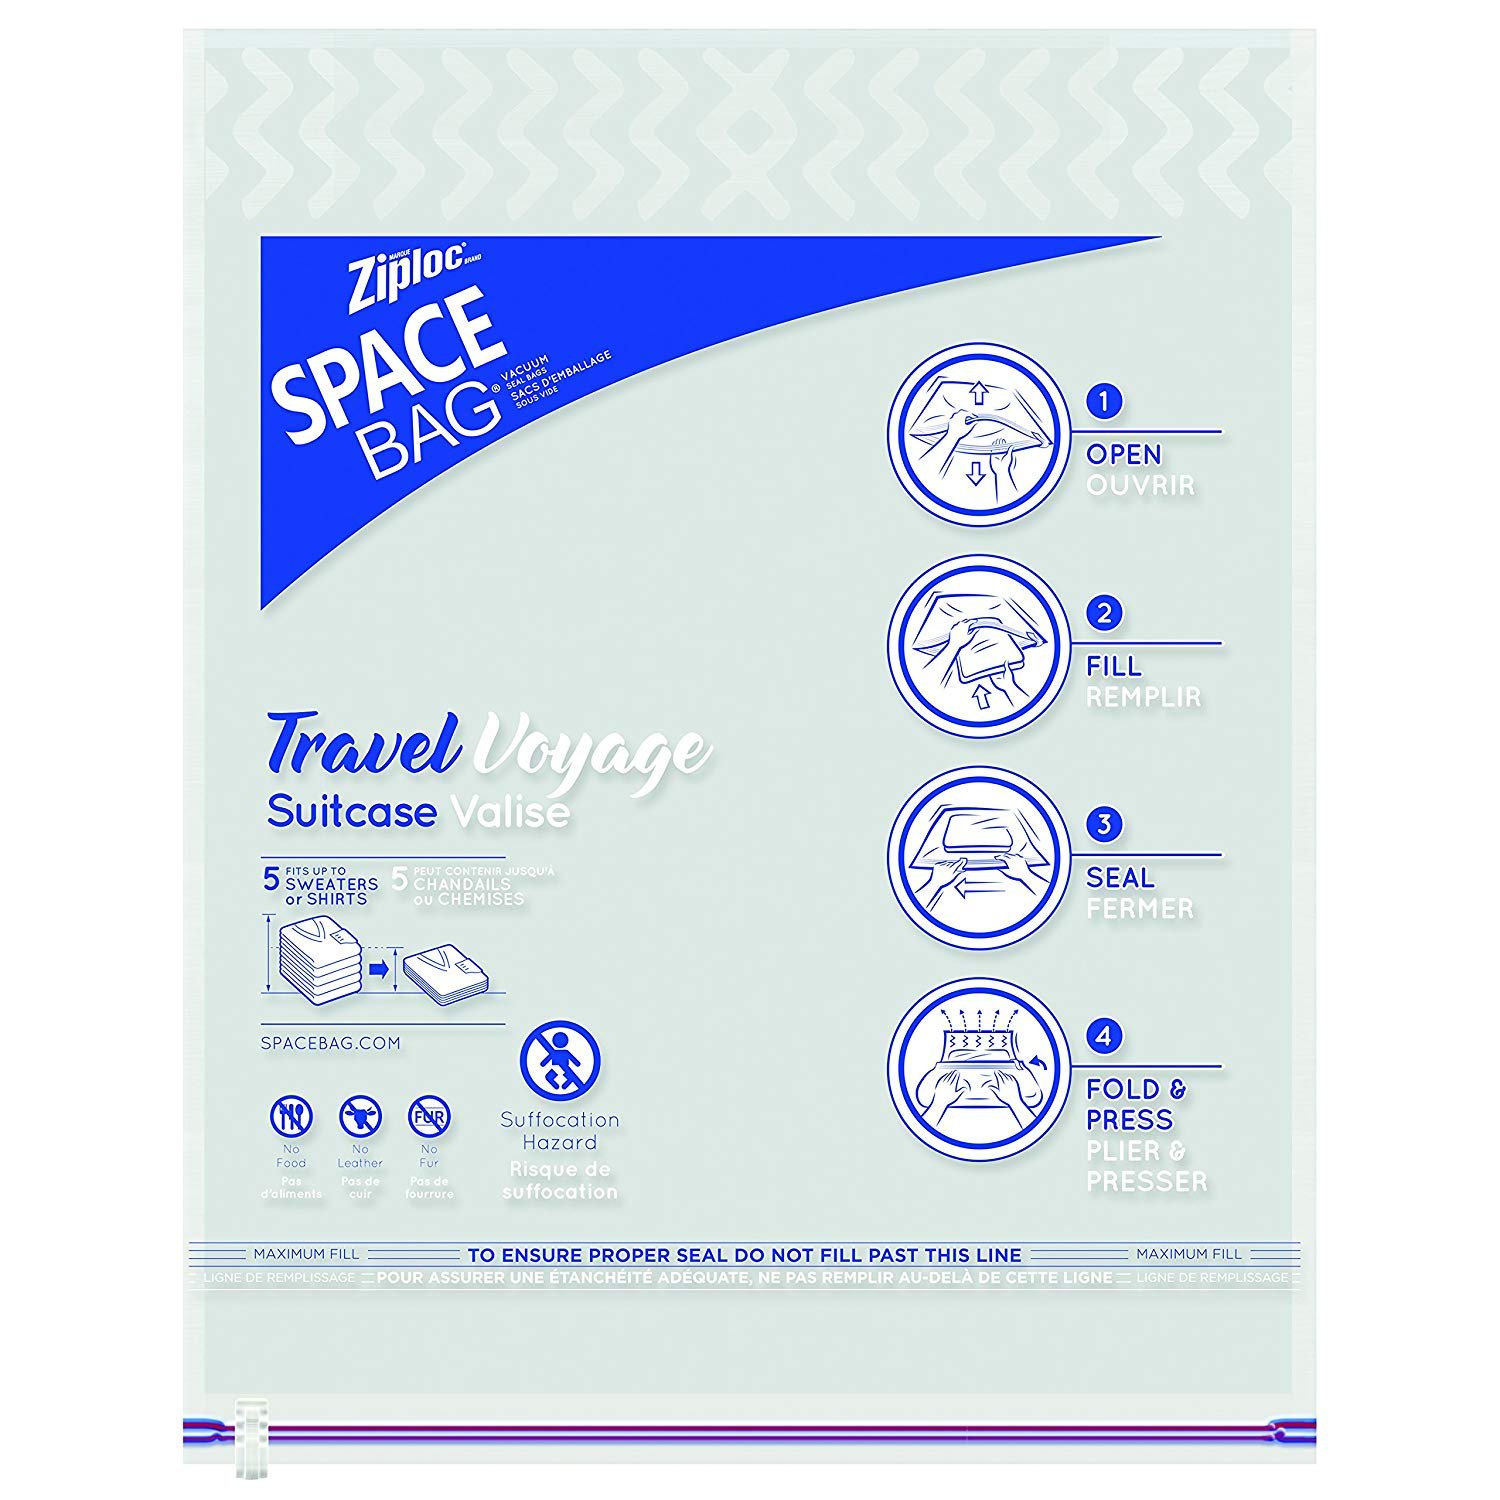 Ziploc Space Bag, Travel Bags - Poly Pack, 1 Pack - image 5 of 5